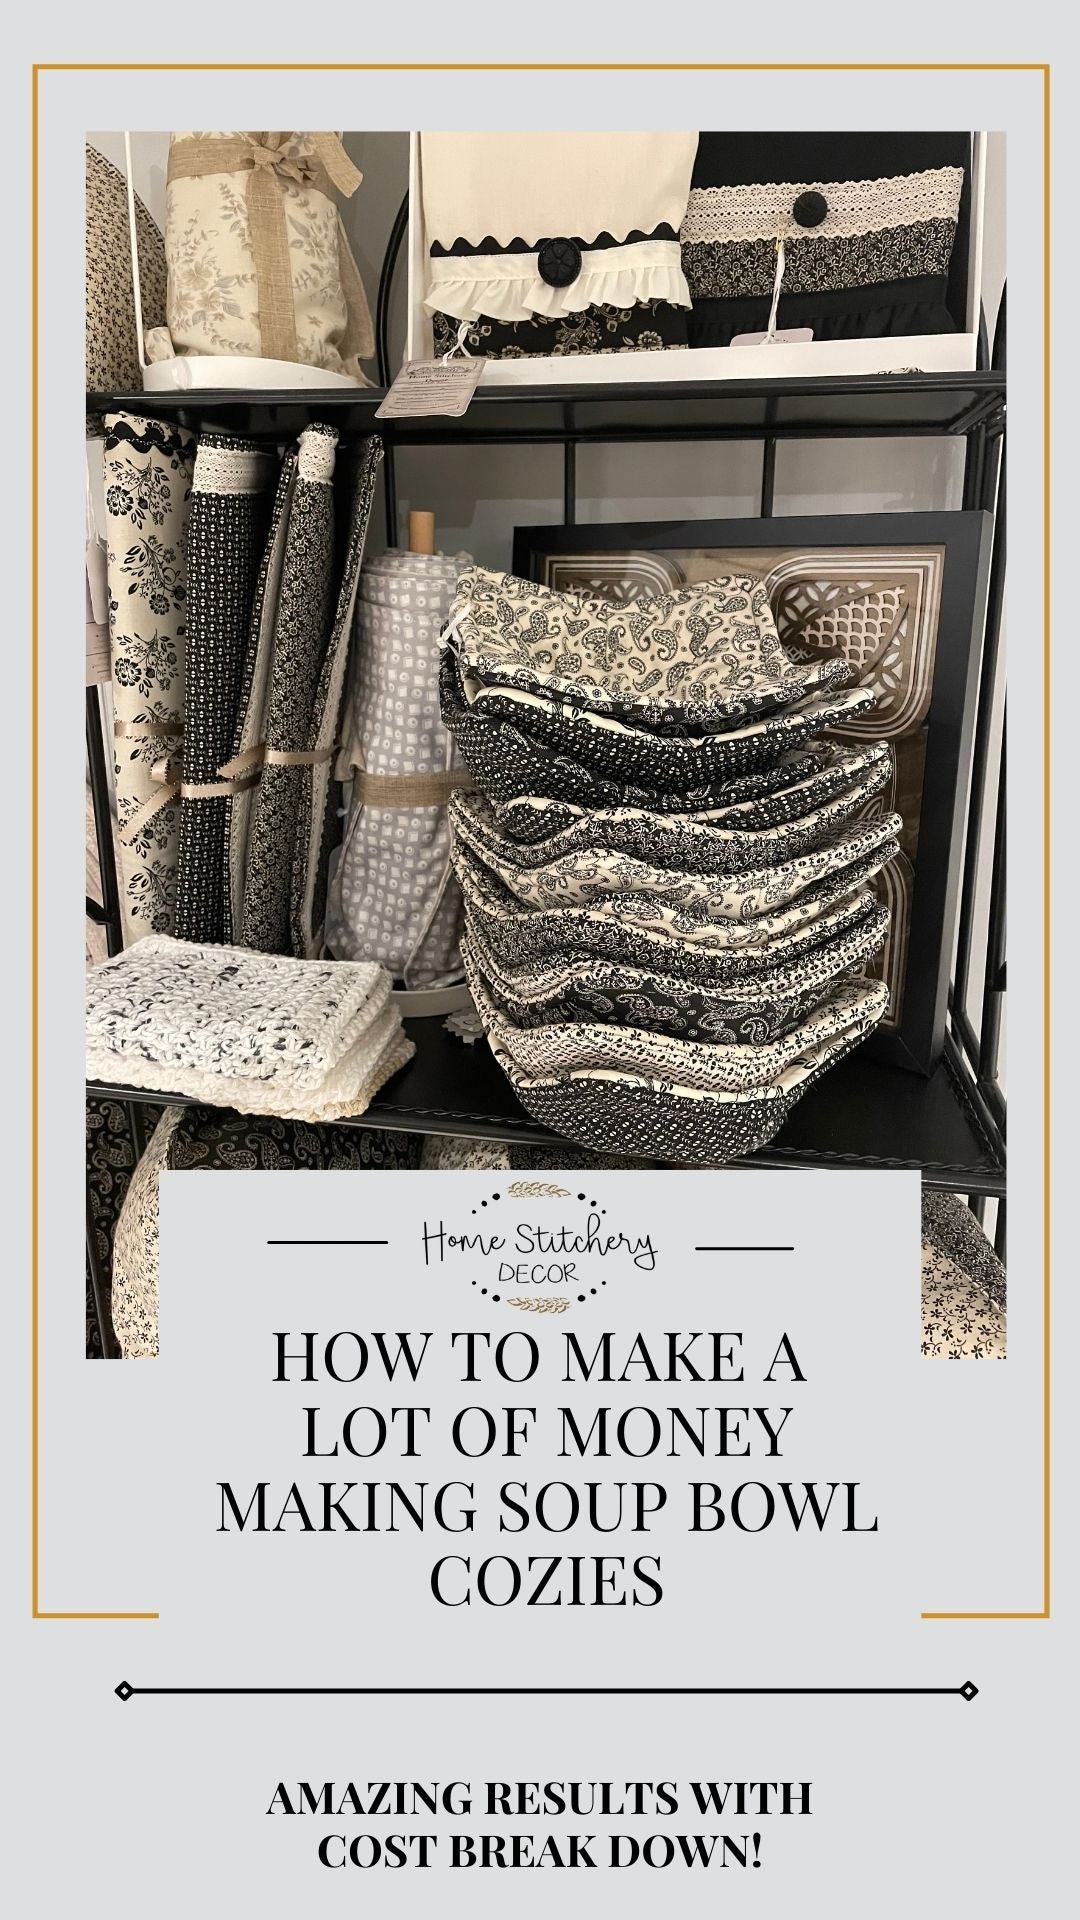 How to Make A LOT OF MONEY Selling Soup Bowl Cozies | Microwave Soup Cozy